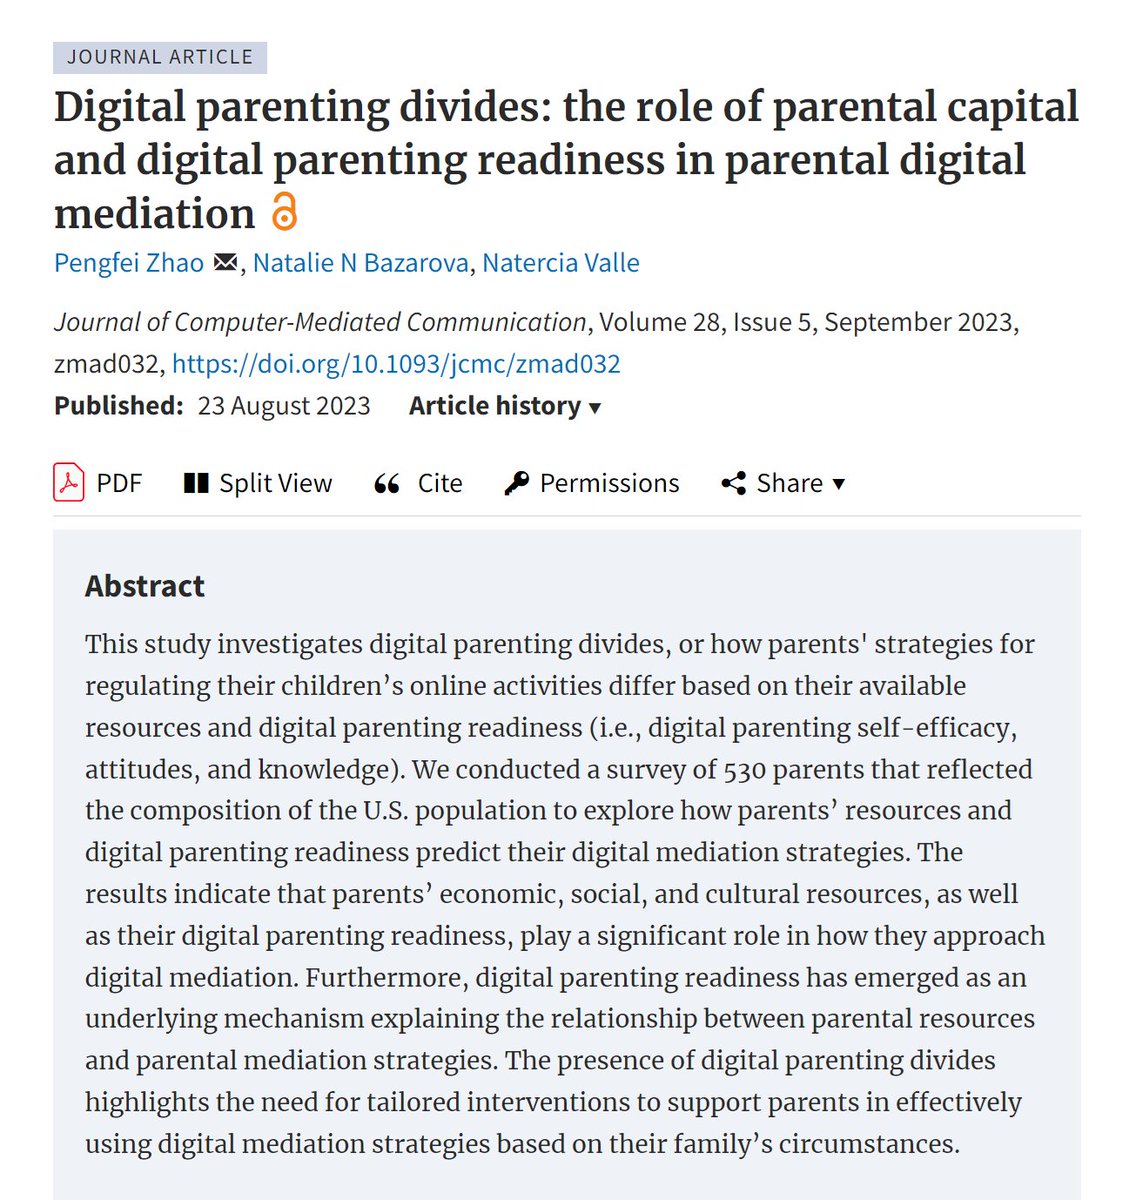 Introducing the newest #jcmc publication 'Digital parenting divides: the role of parental capital and digital parenting readiness in parental digital mediation' by @Pengfei_Zhao_, @nataliebazarova & @NaterciaValle! Read it here: doi.org/10.1093/jcmc/z…